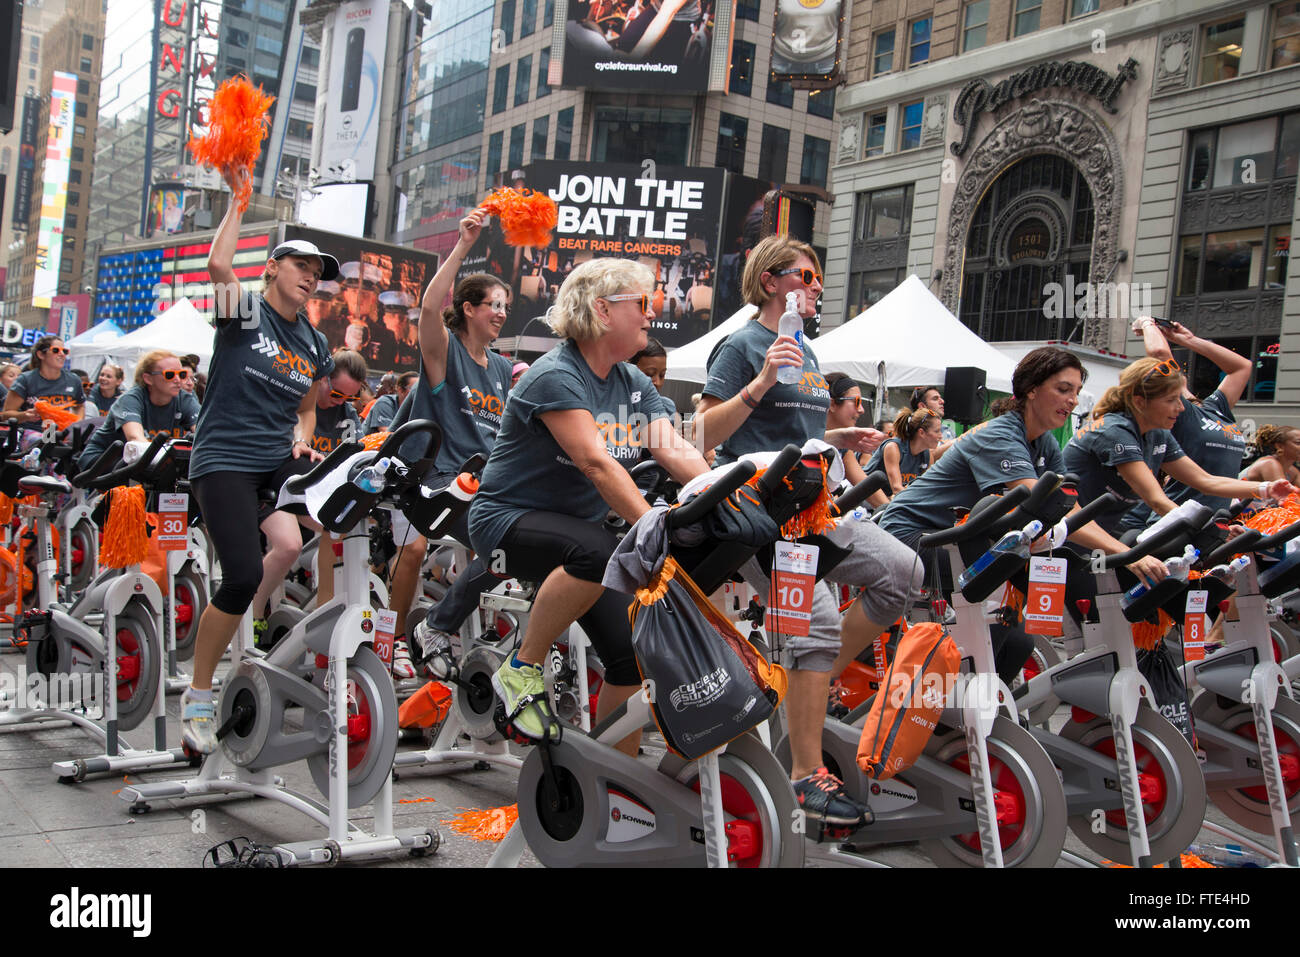 'Join the Battle' Outdoor spinning class in Times Square, New York Stock Photo